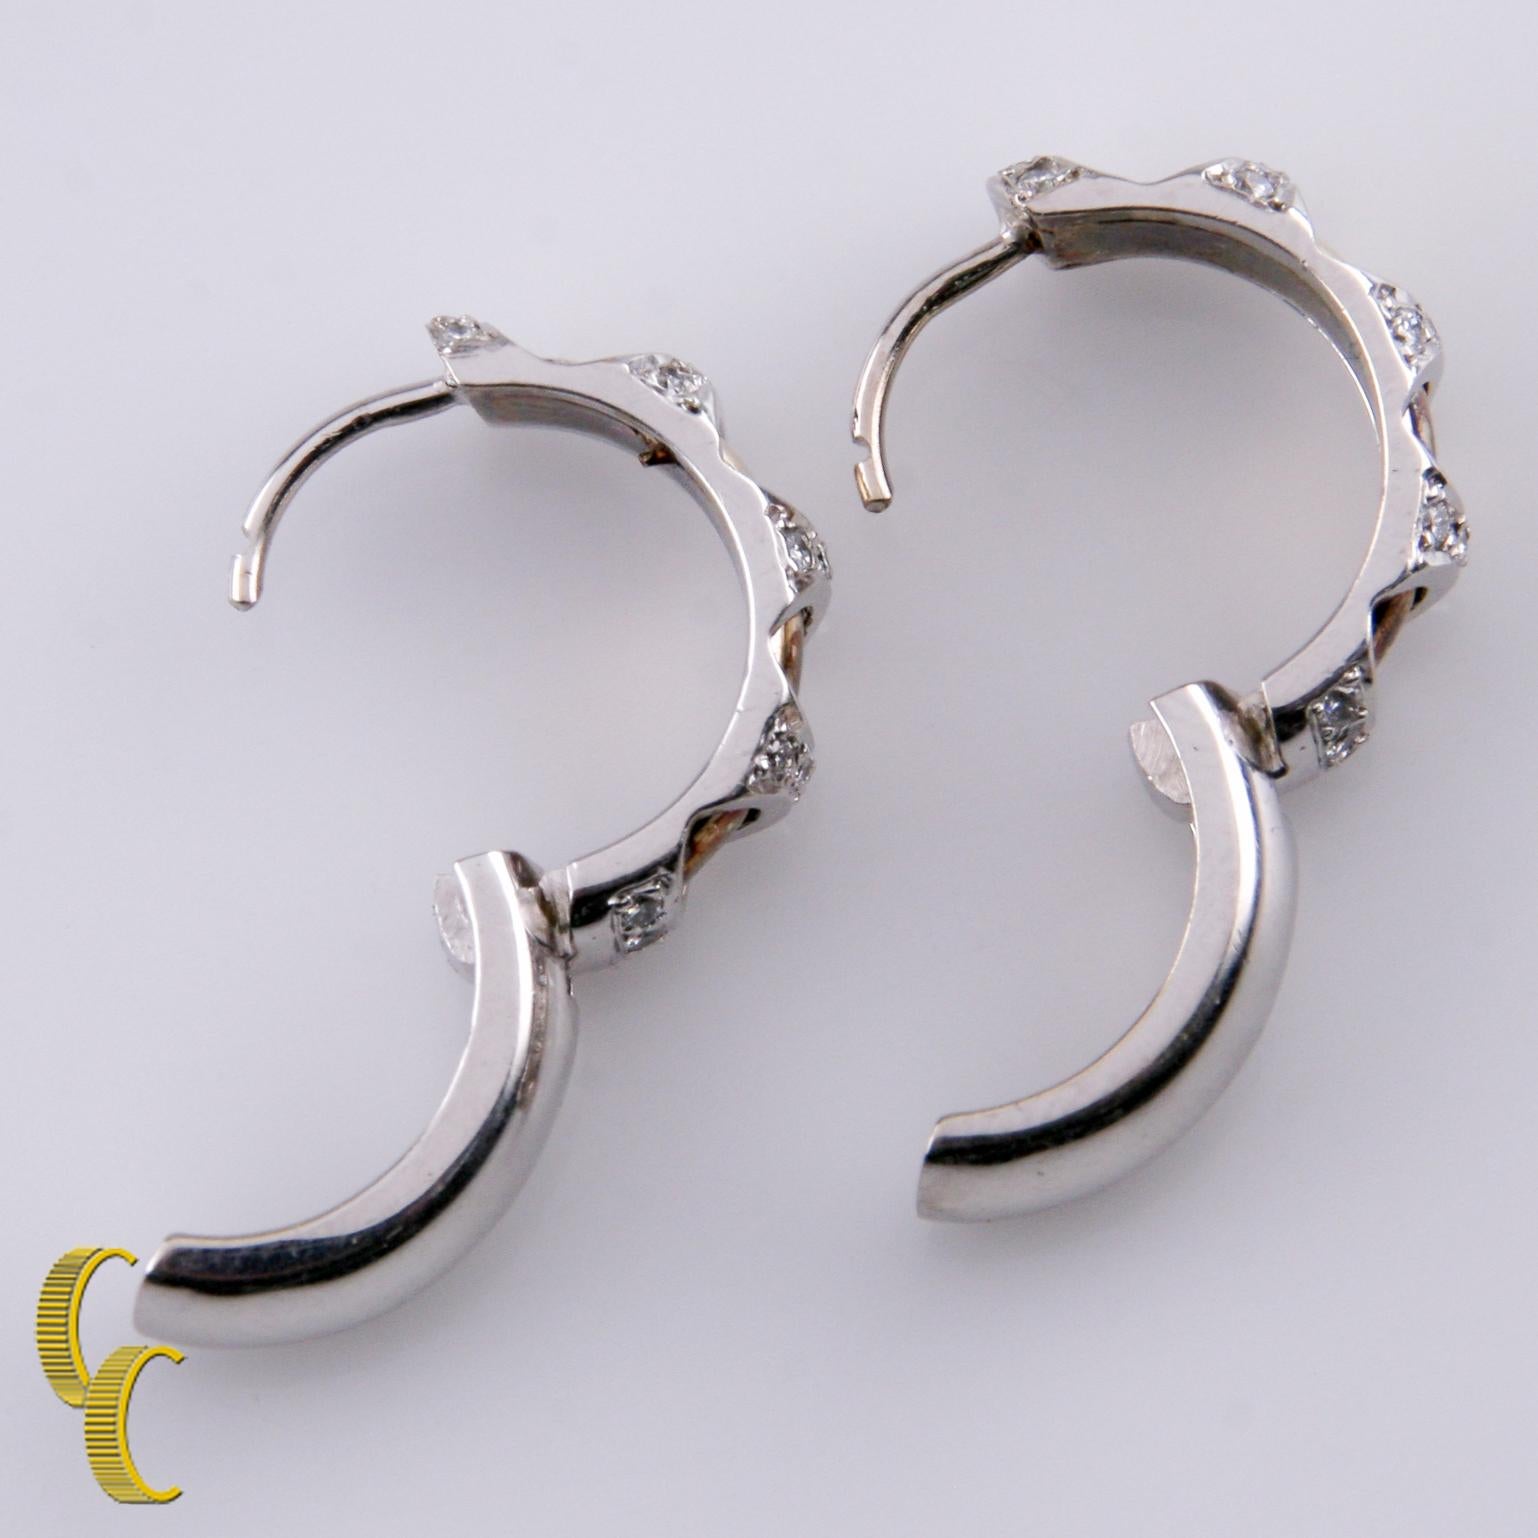 1.00 Carat Diamond Two-Tone Gold Band Ring and Hoop Earrings Set in 14 Karat For Sale 2